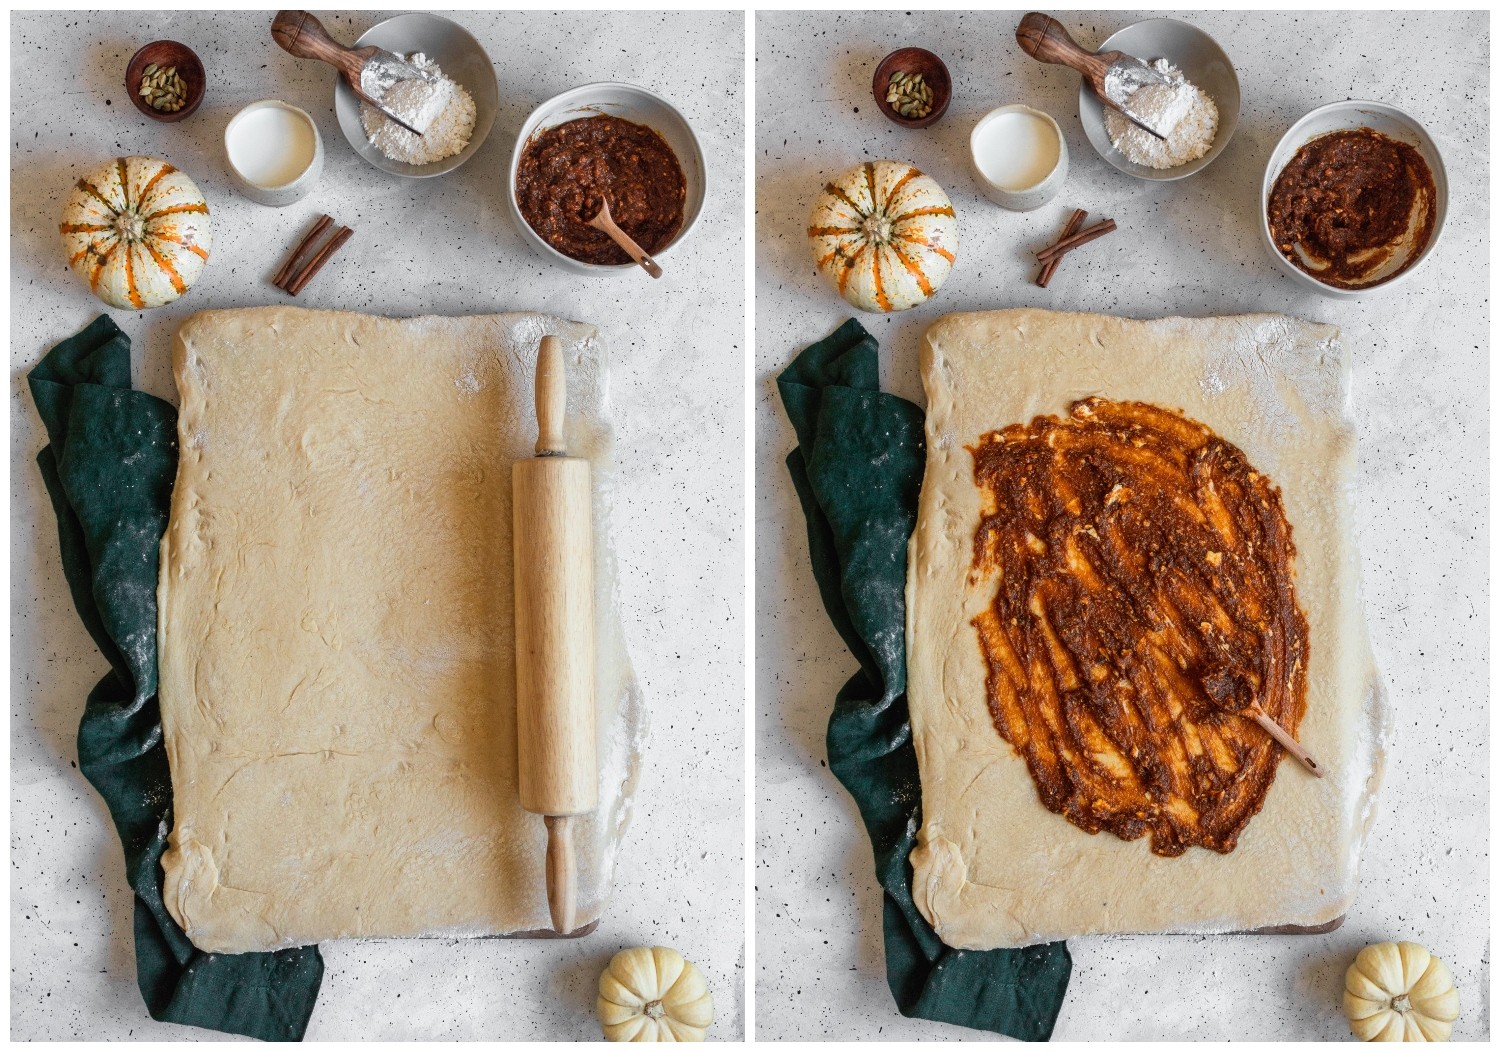 Two overhead photos of dough next to an emerald towel on a grey table. On the left photo, the dough is being rolled, surrounded by ingredients. On the right, pumpkin filling is being spread on the rectangle of dough.